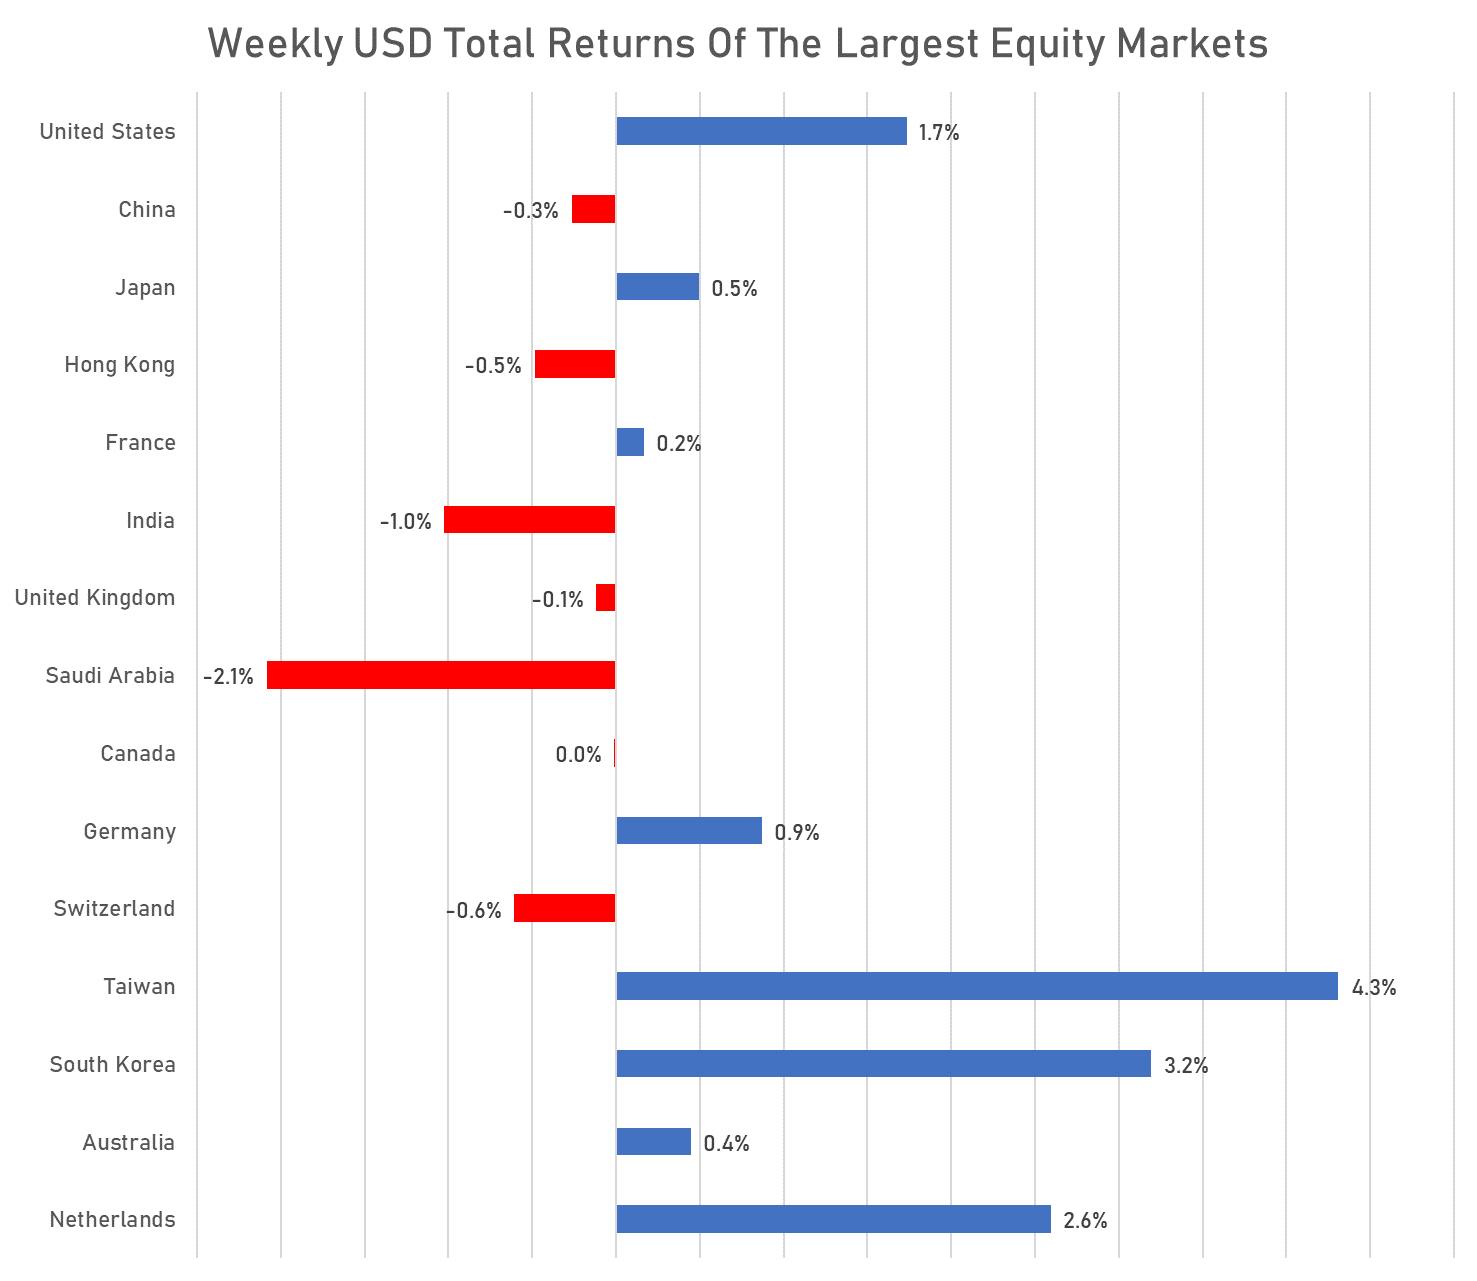 Weekly USD total returns of the largest equity markets | Sources: phipost.com, FactSet data 